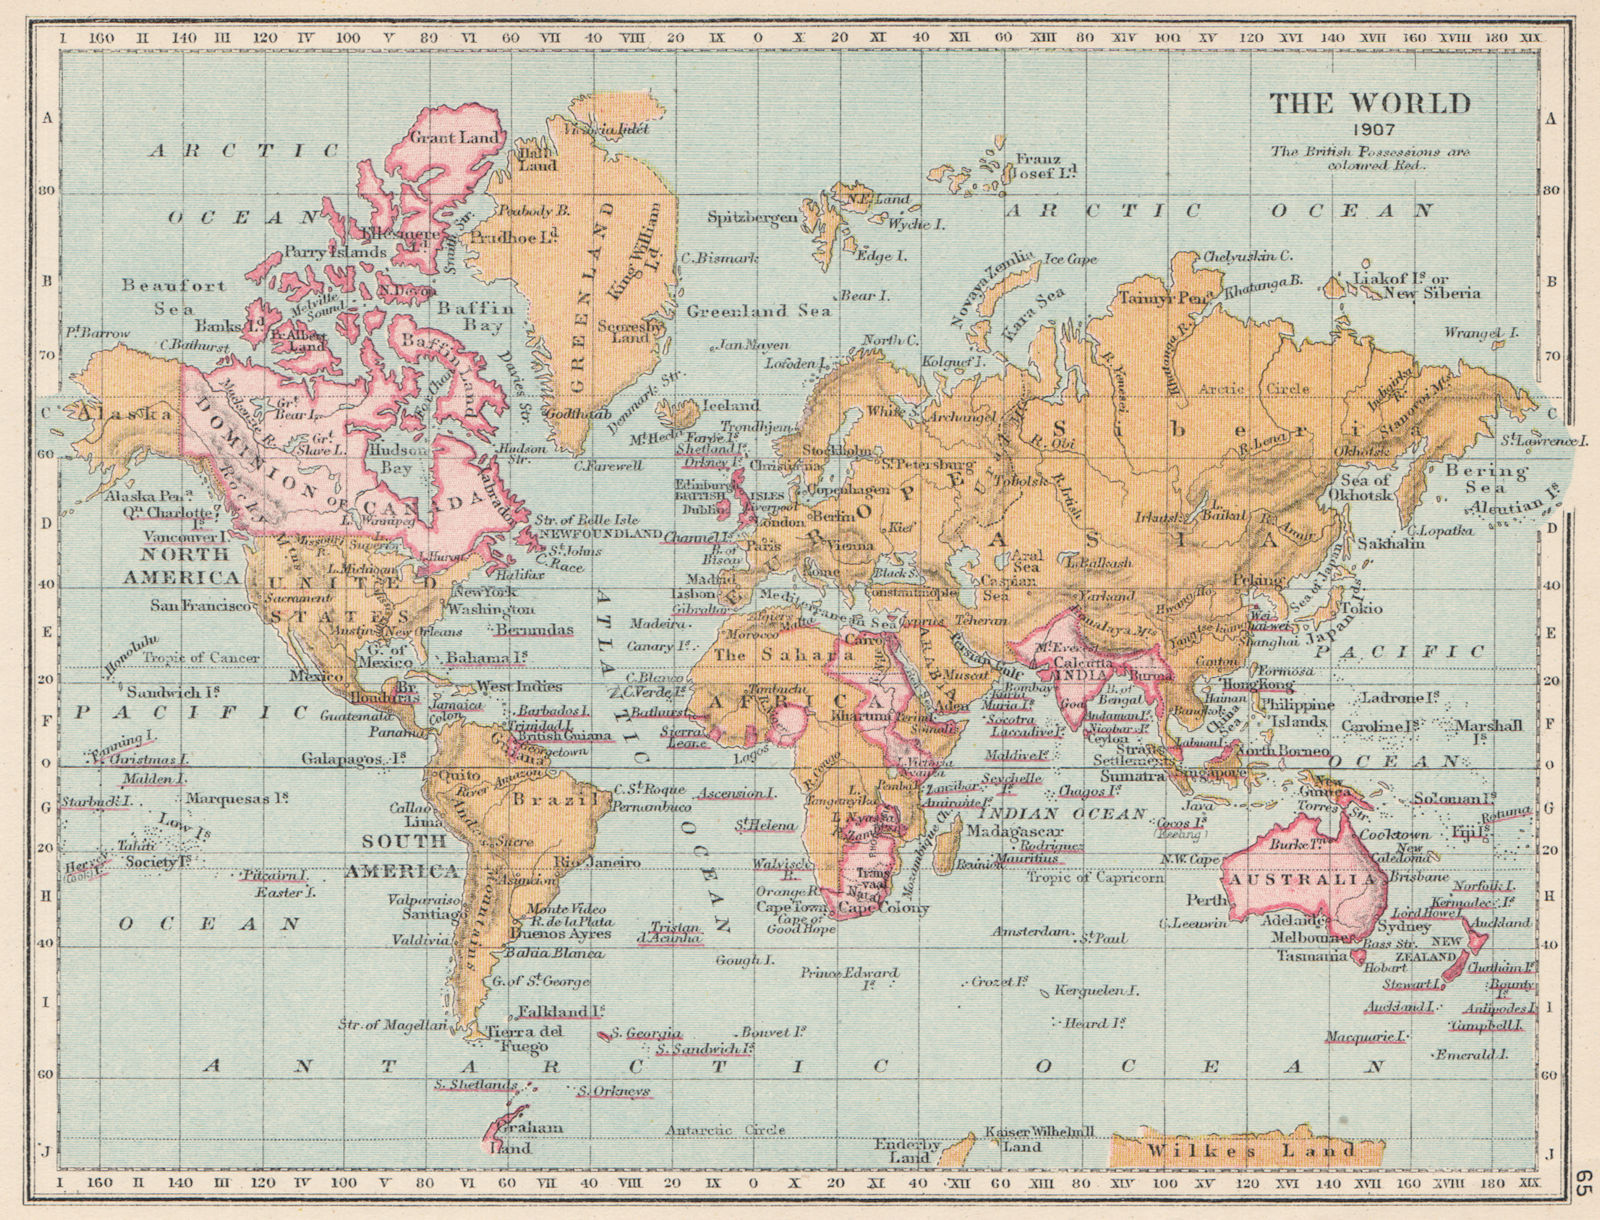 BRITISH EMPIRE 1907. British possessions shown in red. World 1907 old map